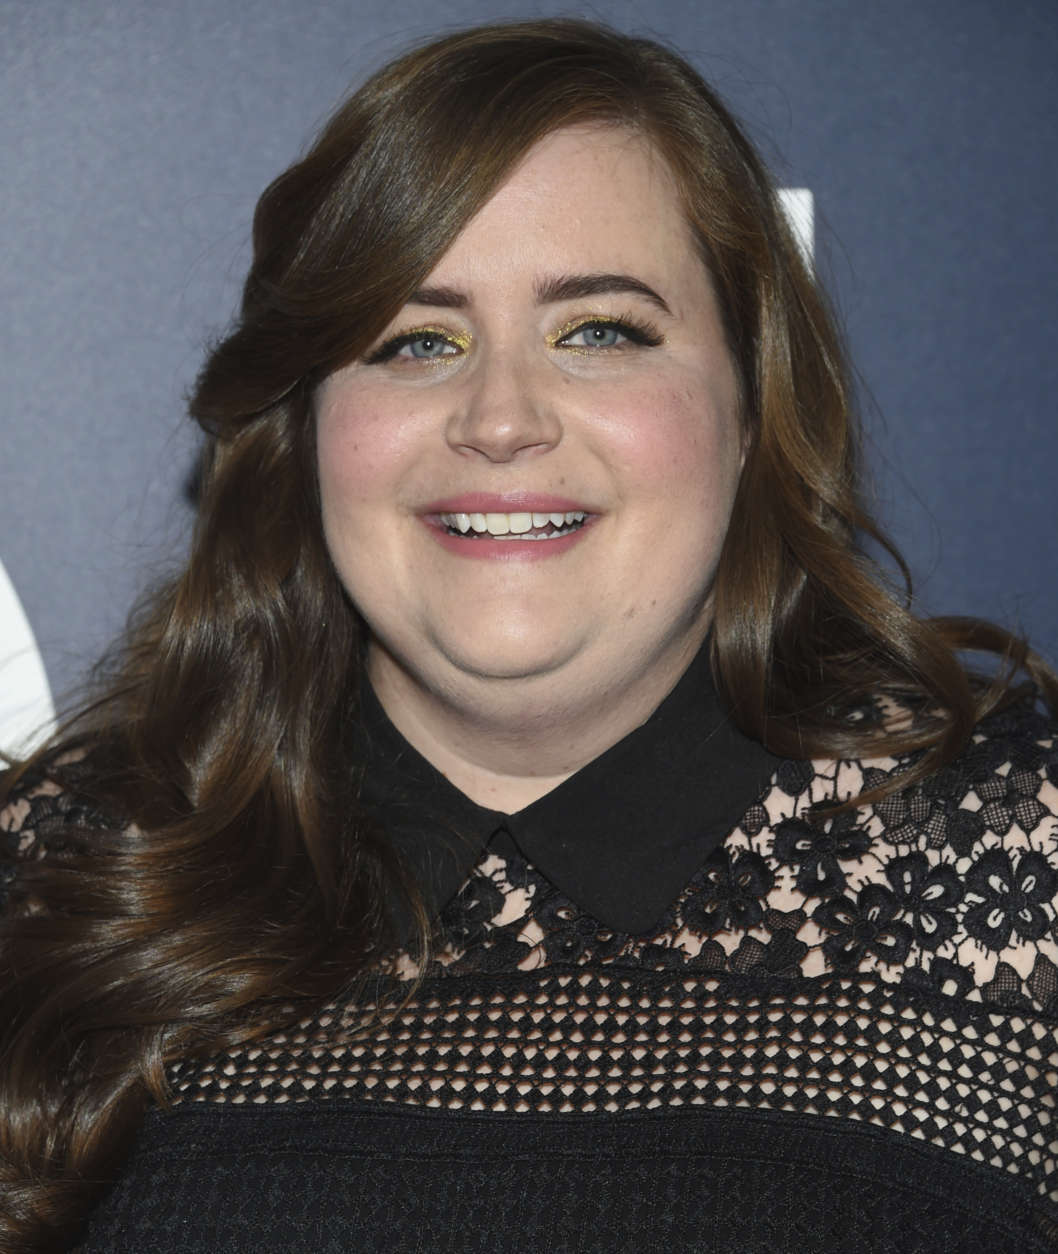 Comedian Aidy Bryant (”Saturday Night Live”) is 30 on May 7.
Aidy Bryant attends the premiere of HBO's "Girls" sixth and final season at Alice Tully Hall on Thursday, Feb. 2, 2017, in New York. (Photo by Evan Agostini/Invision/AP)